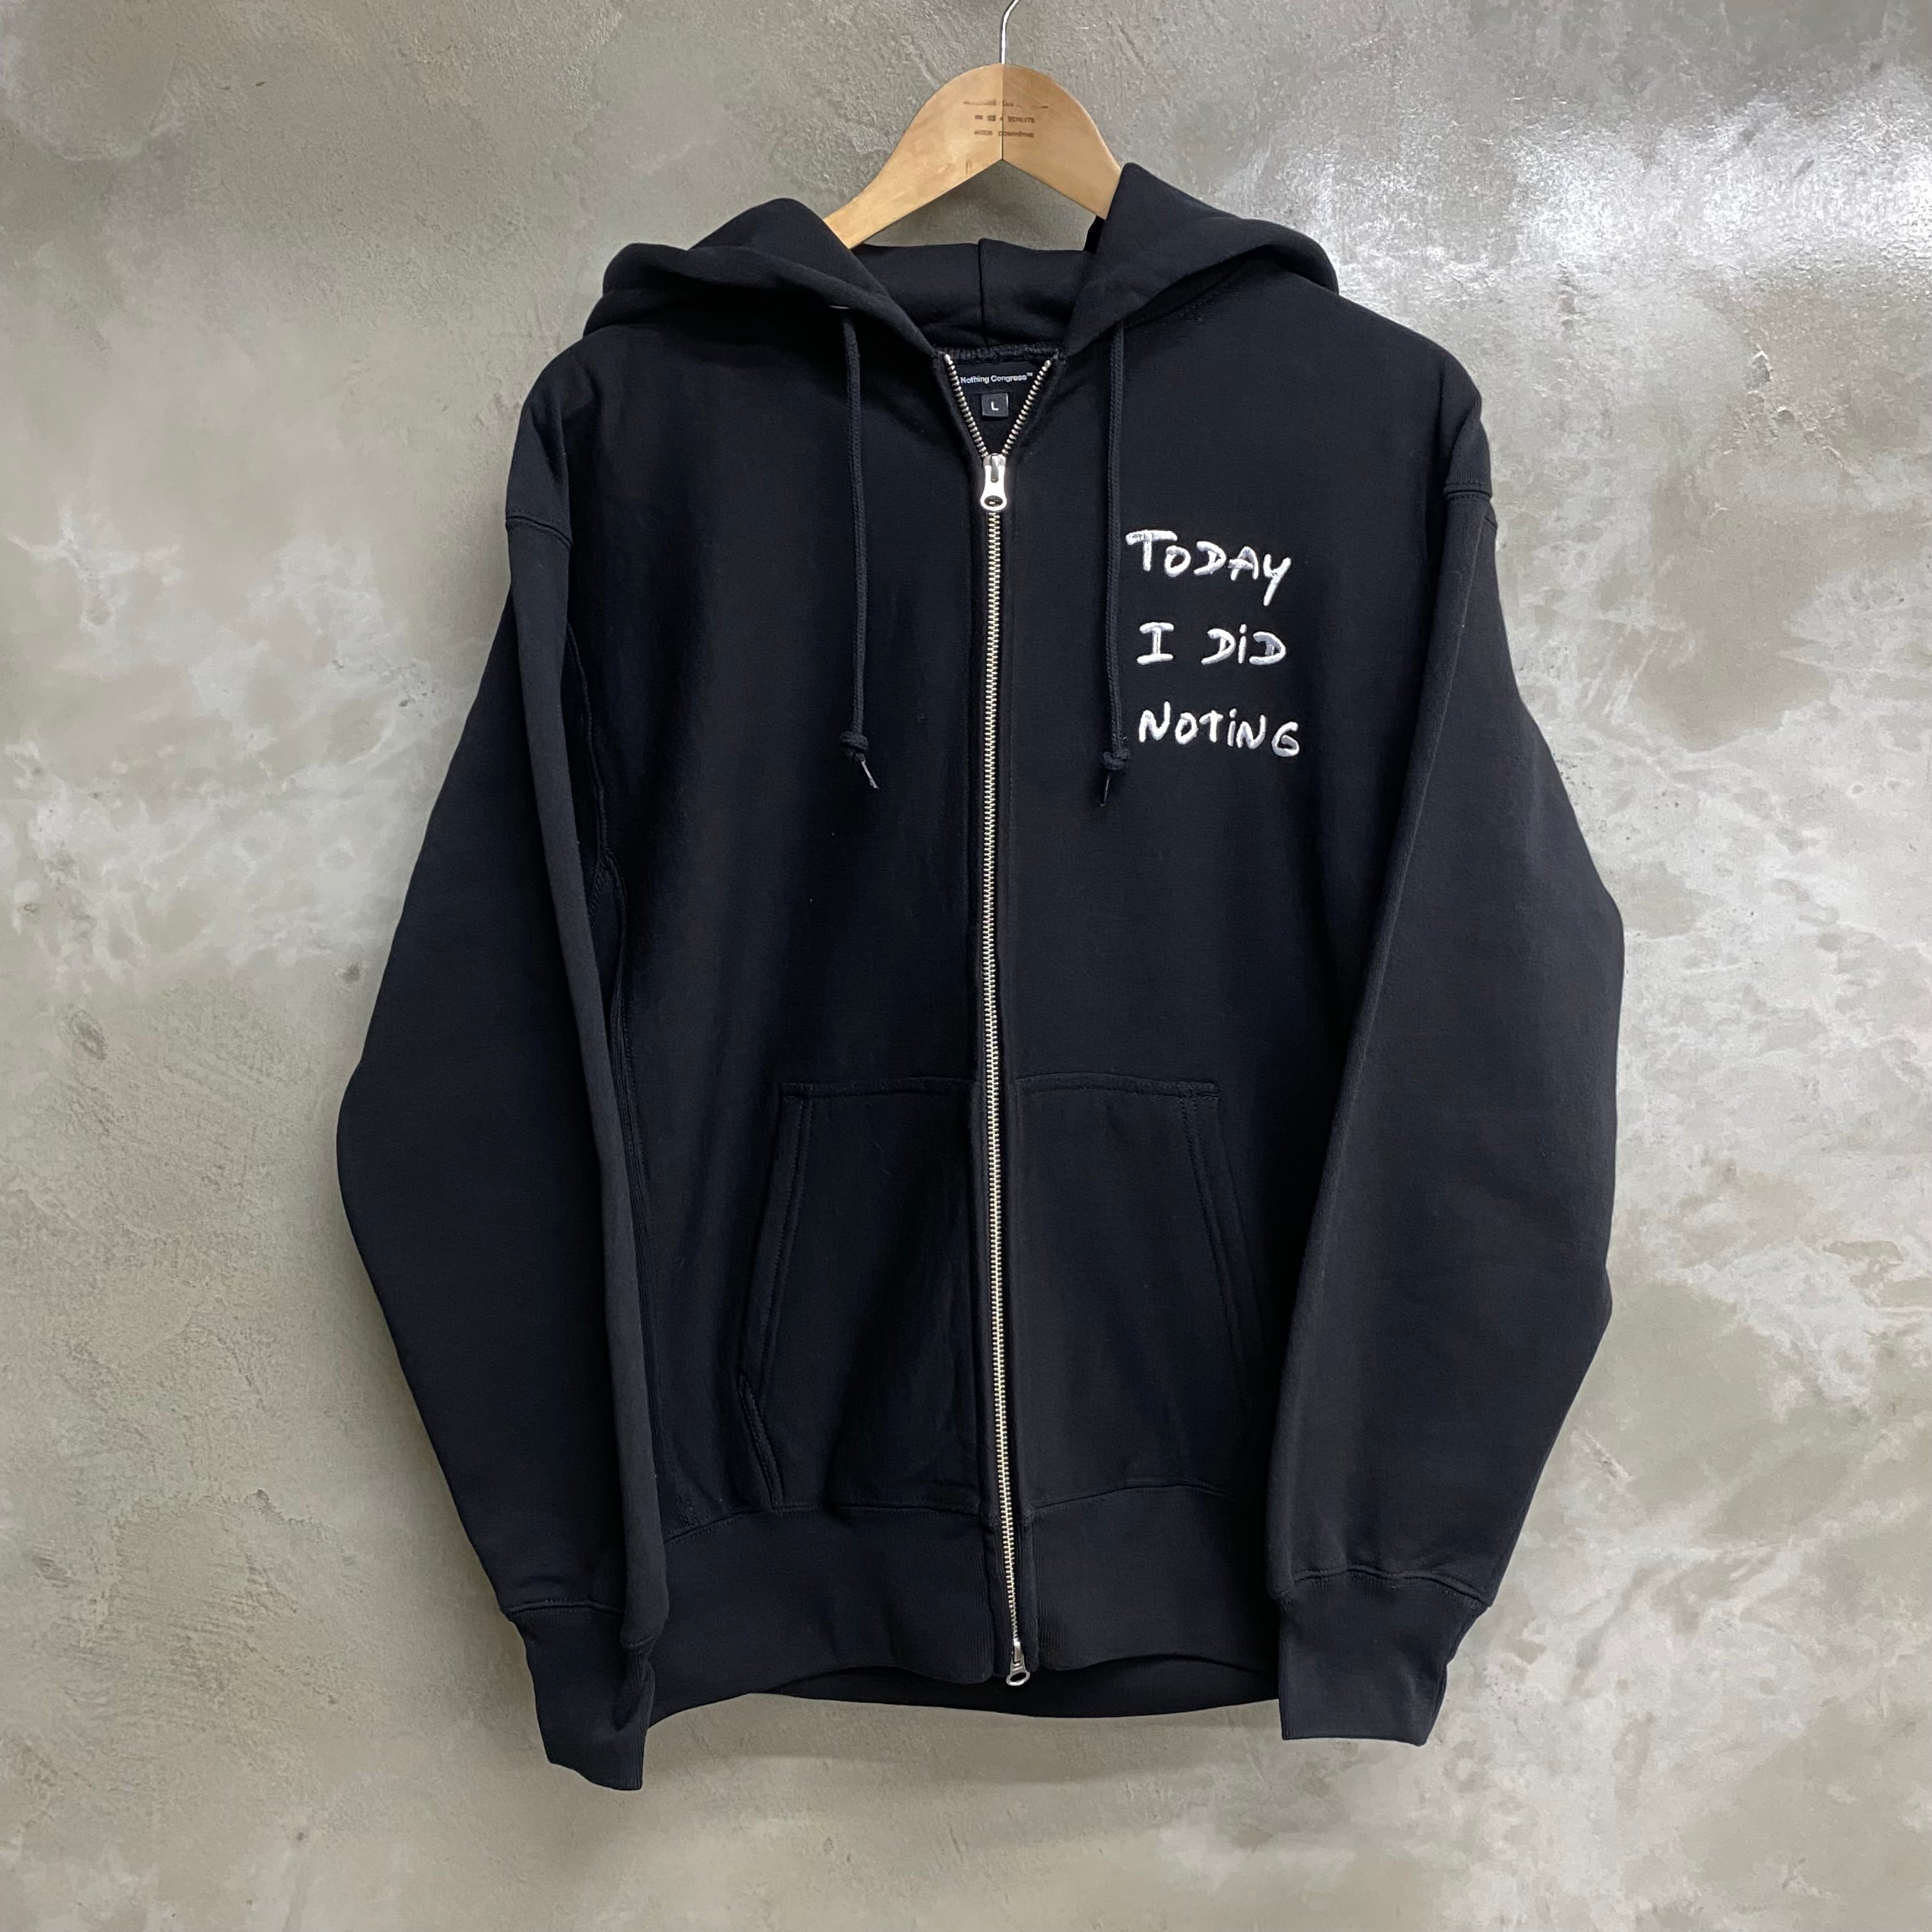 Do Nothing Congress ZIP UP HOODIE  DNC x Thomas Lelu Pull " "TODAY I DID" / Do Nothing Congress